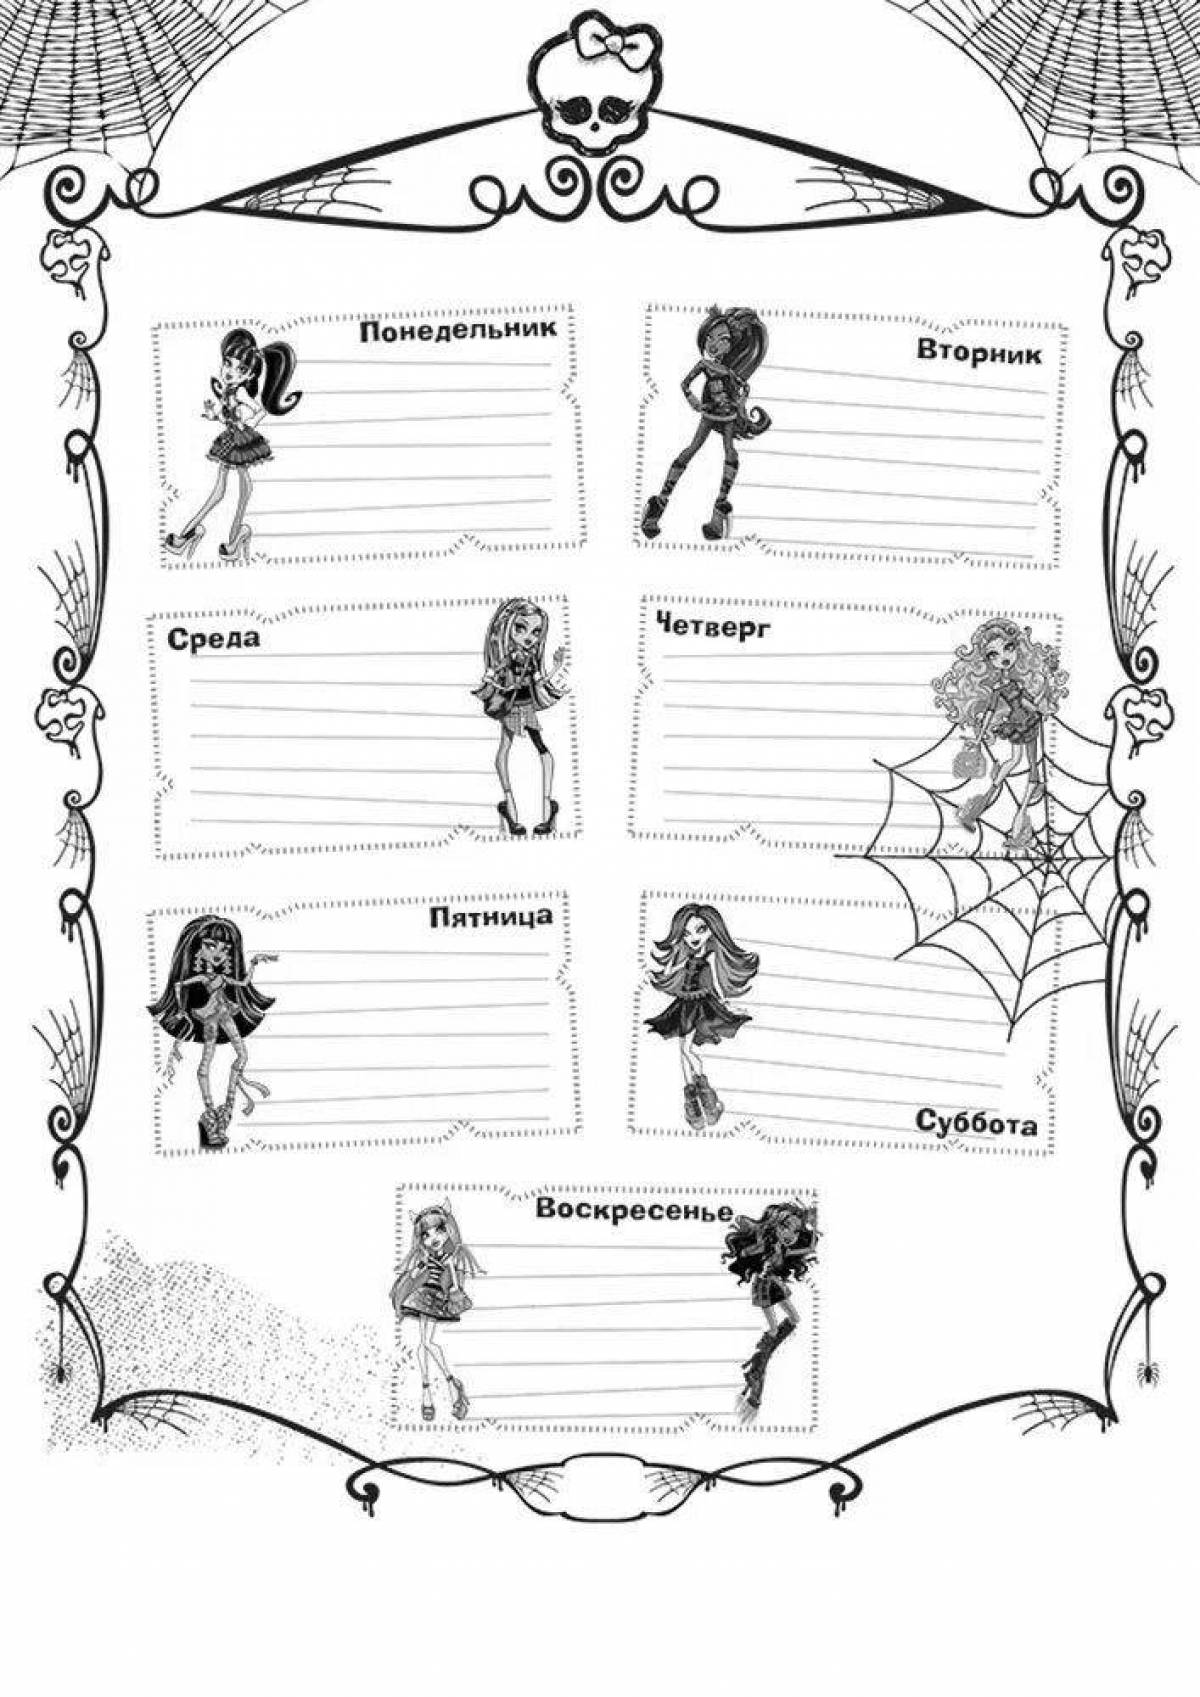 Fun timetable coloring page